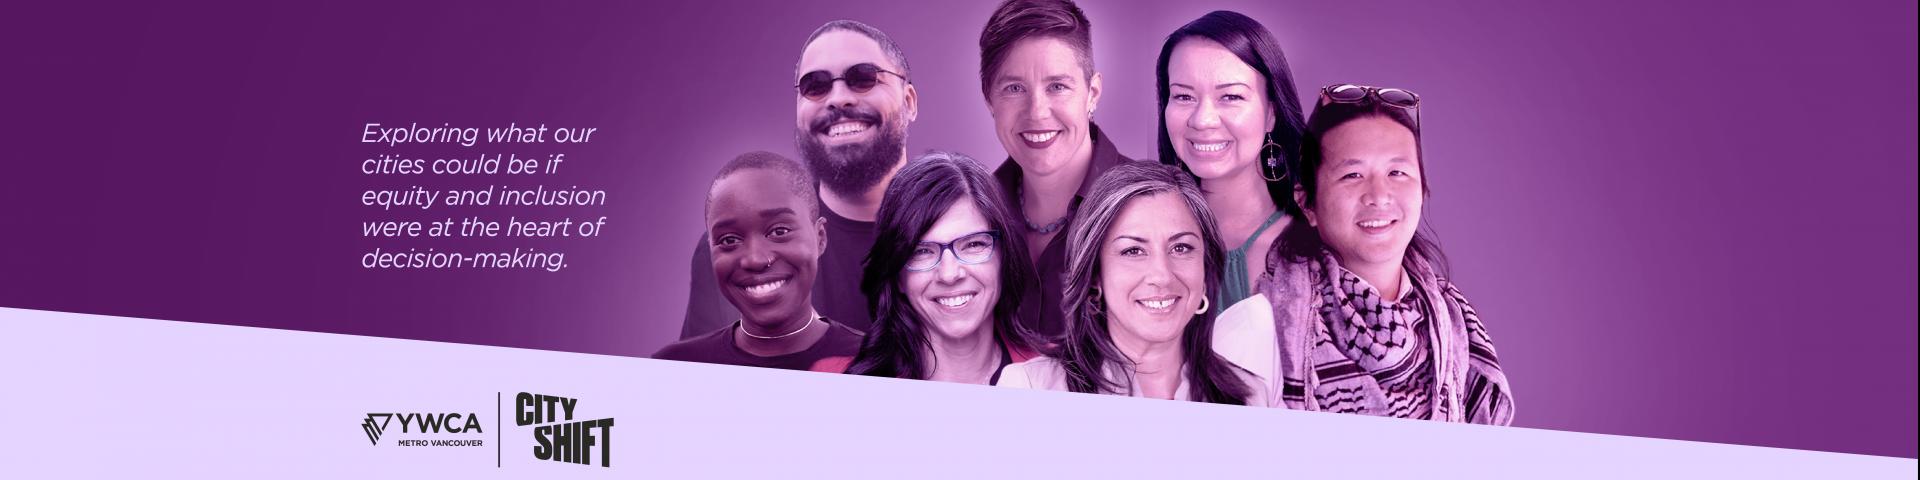 Event promotional banner with purple background and light purple diagonal stripe across the bottom, with speakers Nic Wayara, Elliott Slinn, Andrea Reimer, Tiffany Muller-Myrdahl, Maria Vassilakou, Ginger Gosnell-Myers,and Kevin Huang shown from left to right.